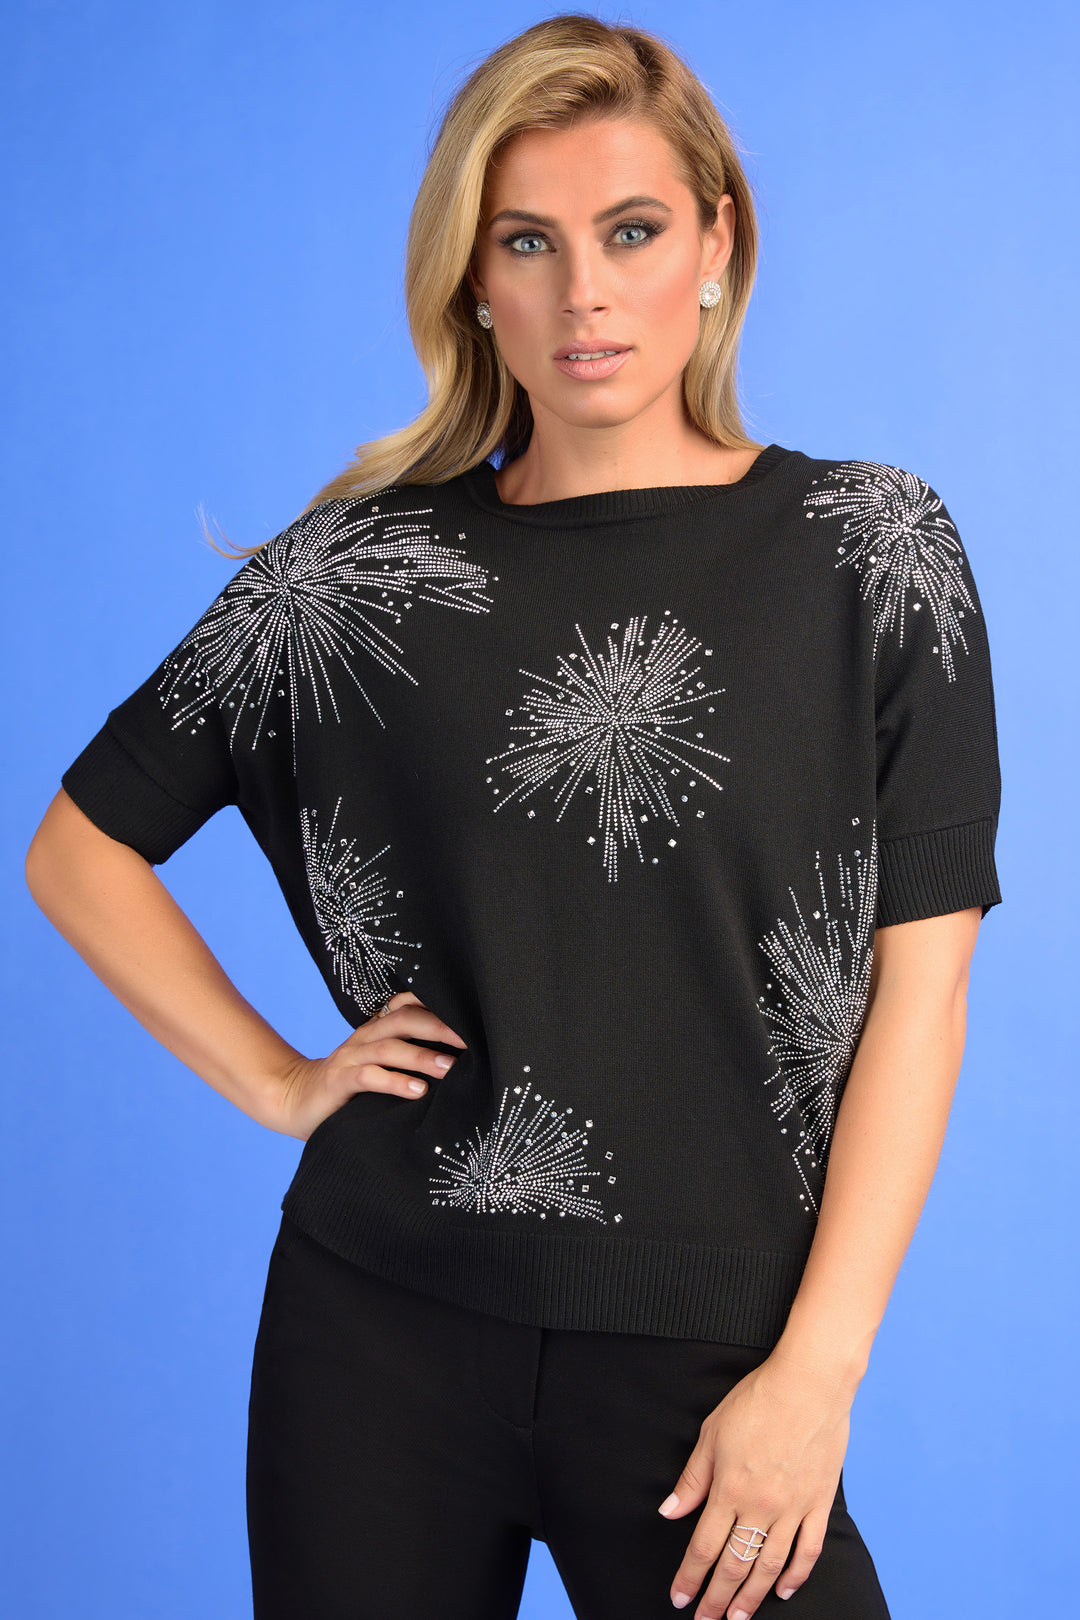 The beautiful 'fireworks' or starburst print design will be sure to sparkle any night! 